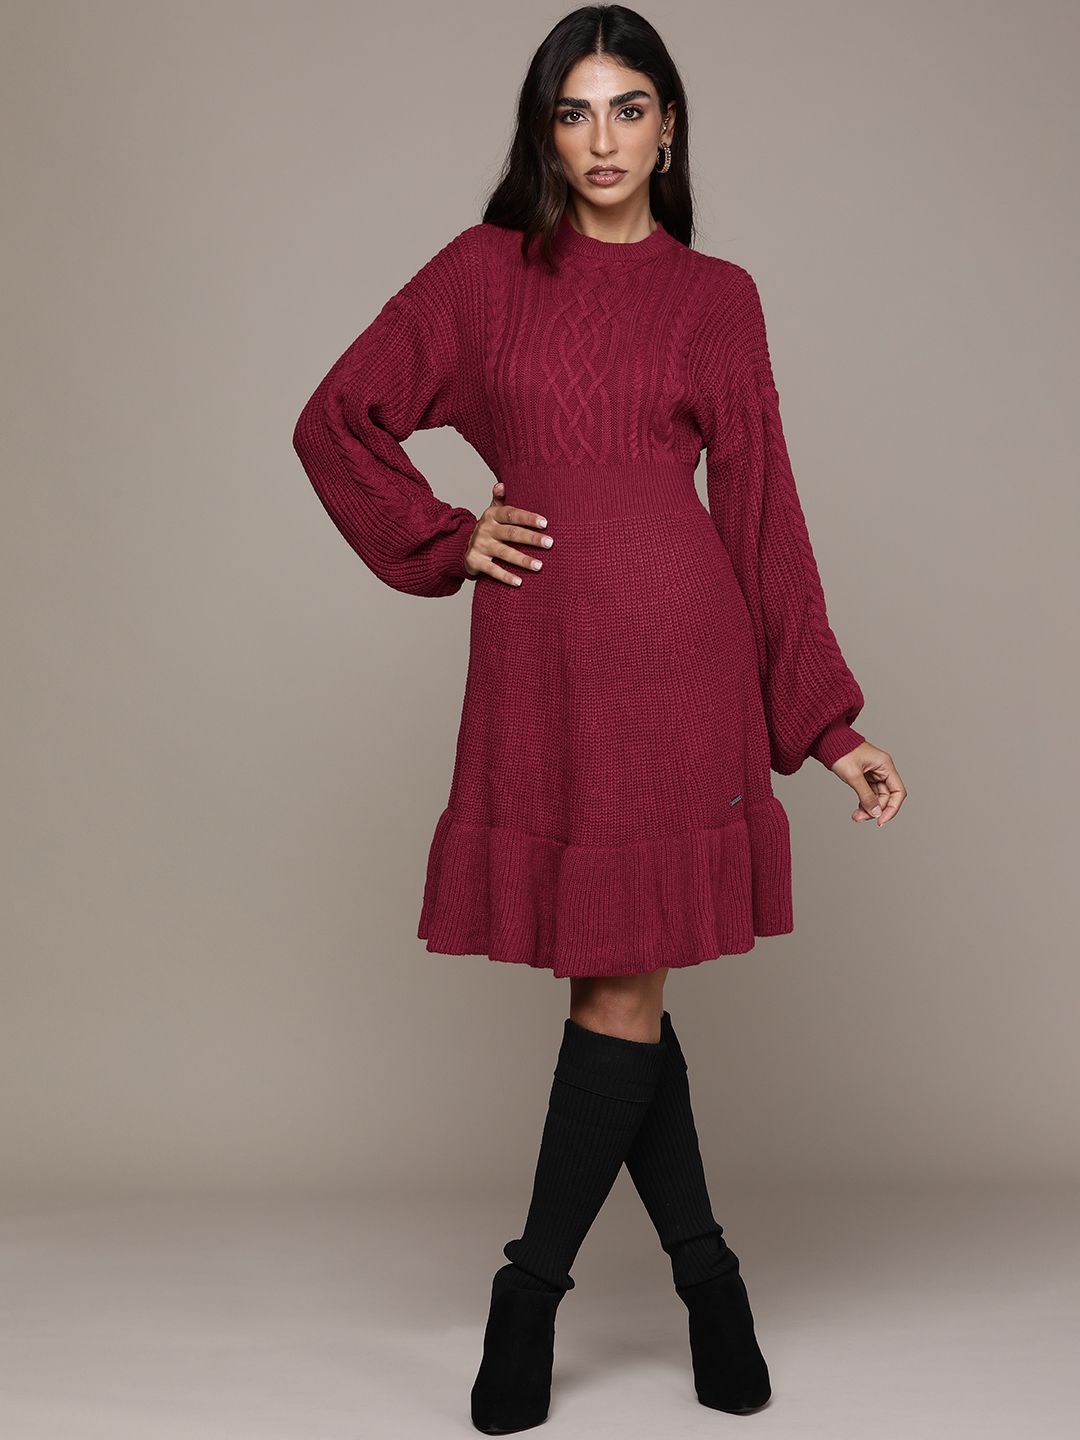 bebe Maroon Acrylic Fit & Flare Dress Price in India